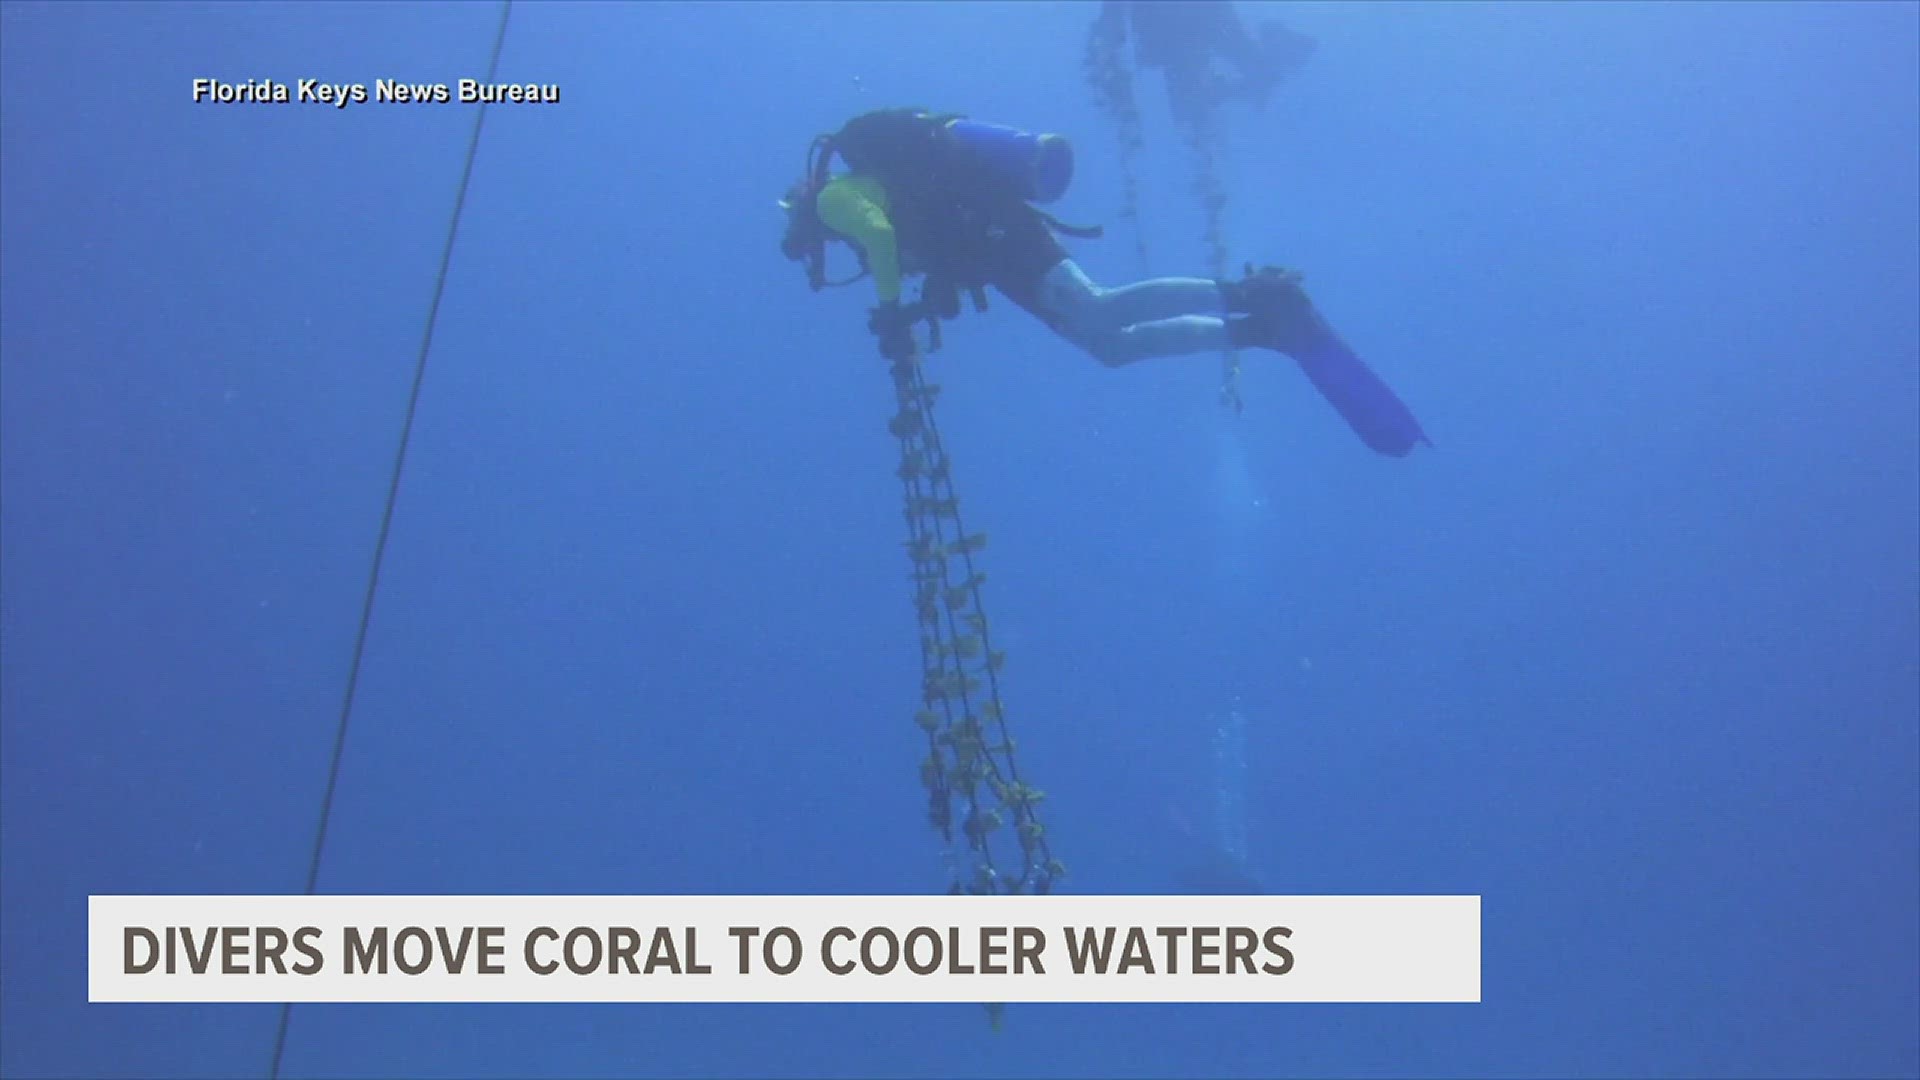 The group Reef Renewal says water temperatures have been warmer than usual and that's causing some coral in the area to undergo stress and bleach.